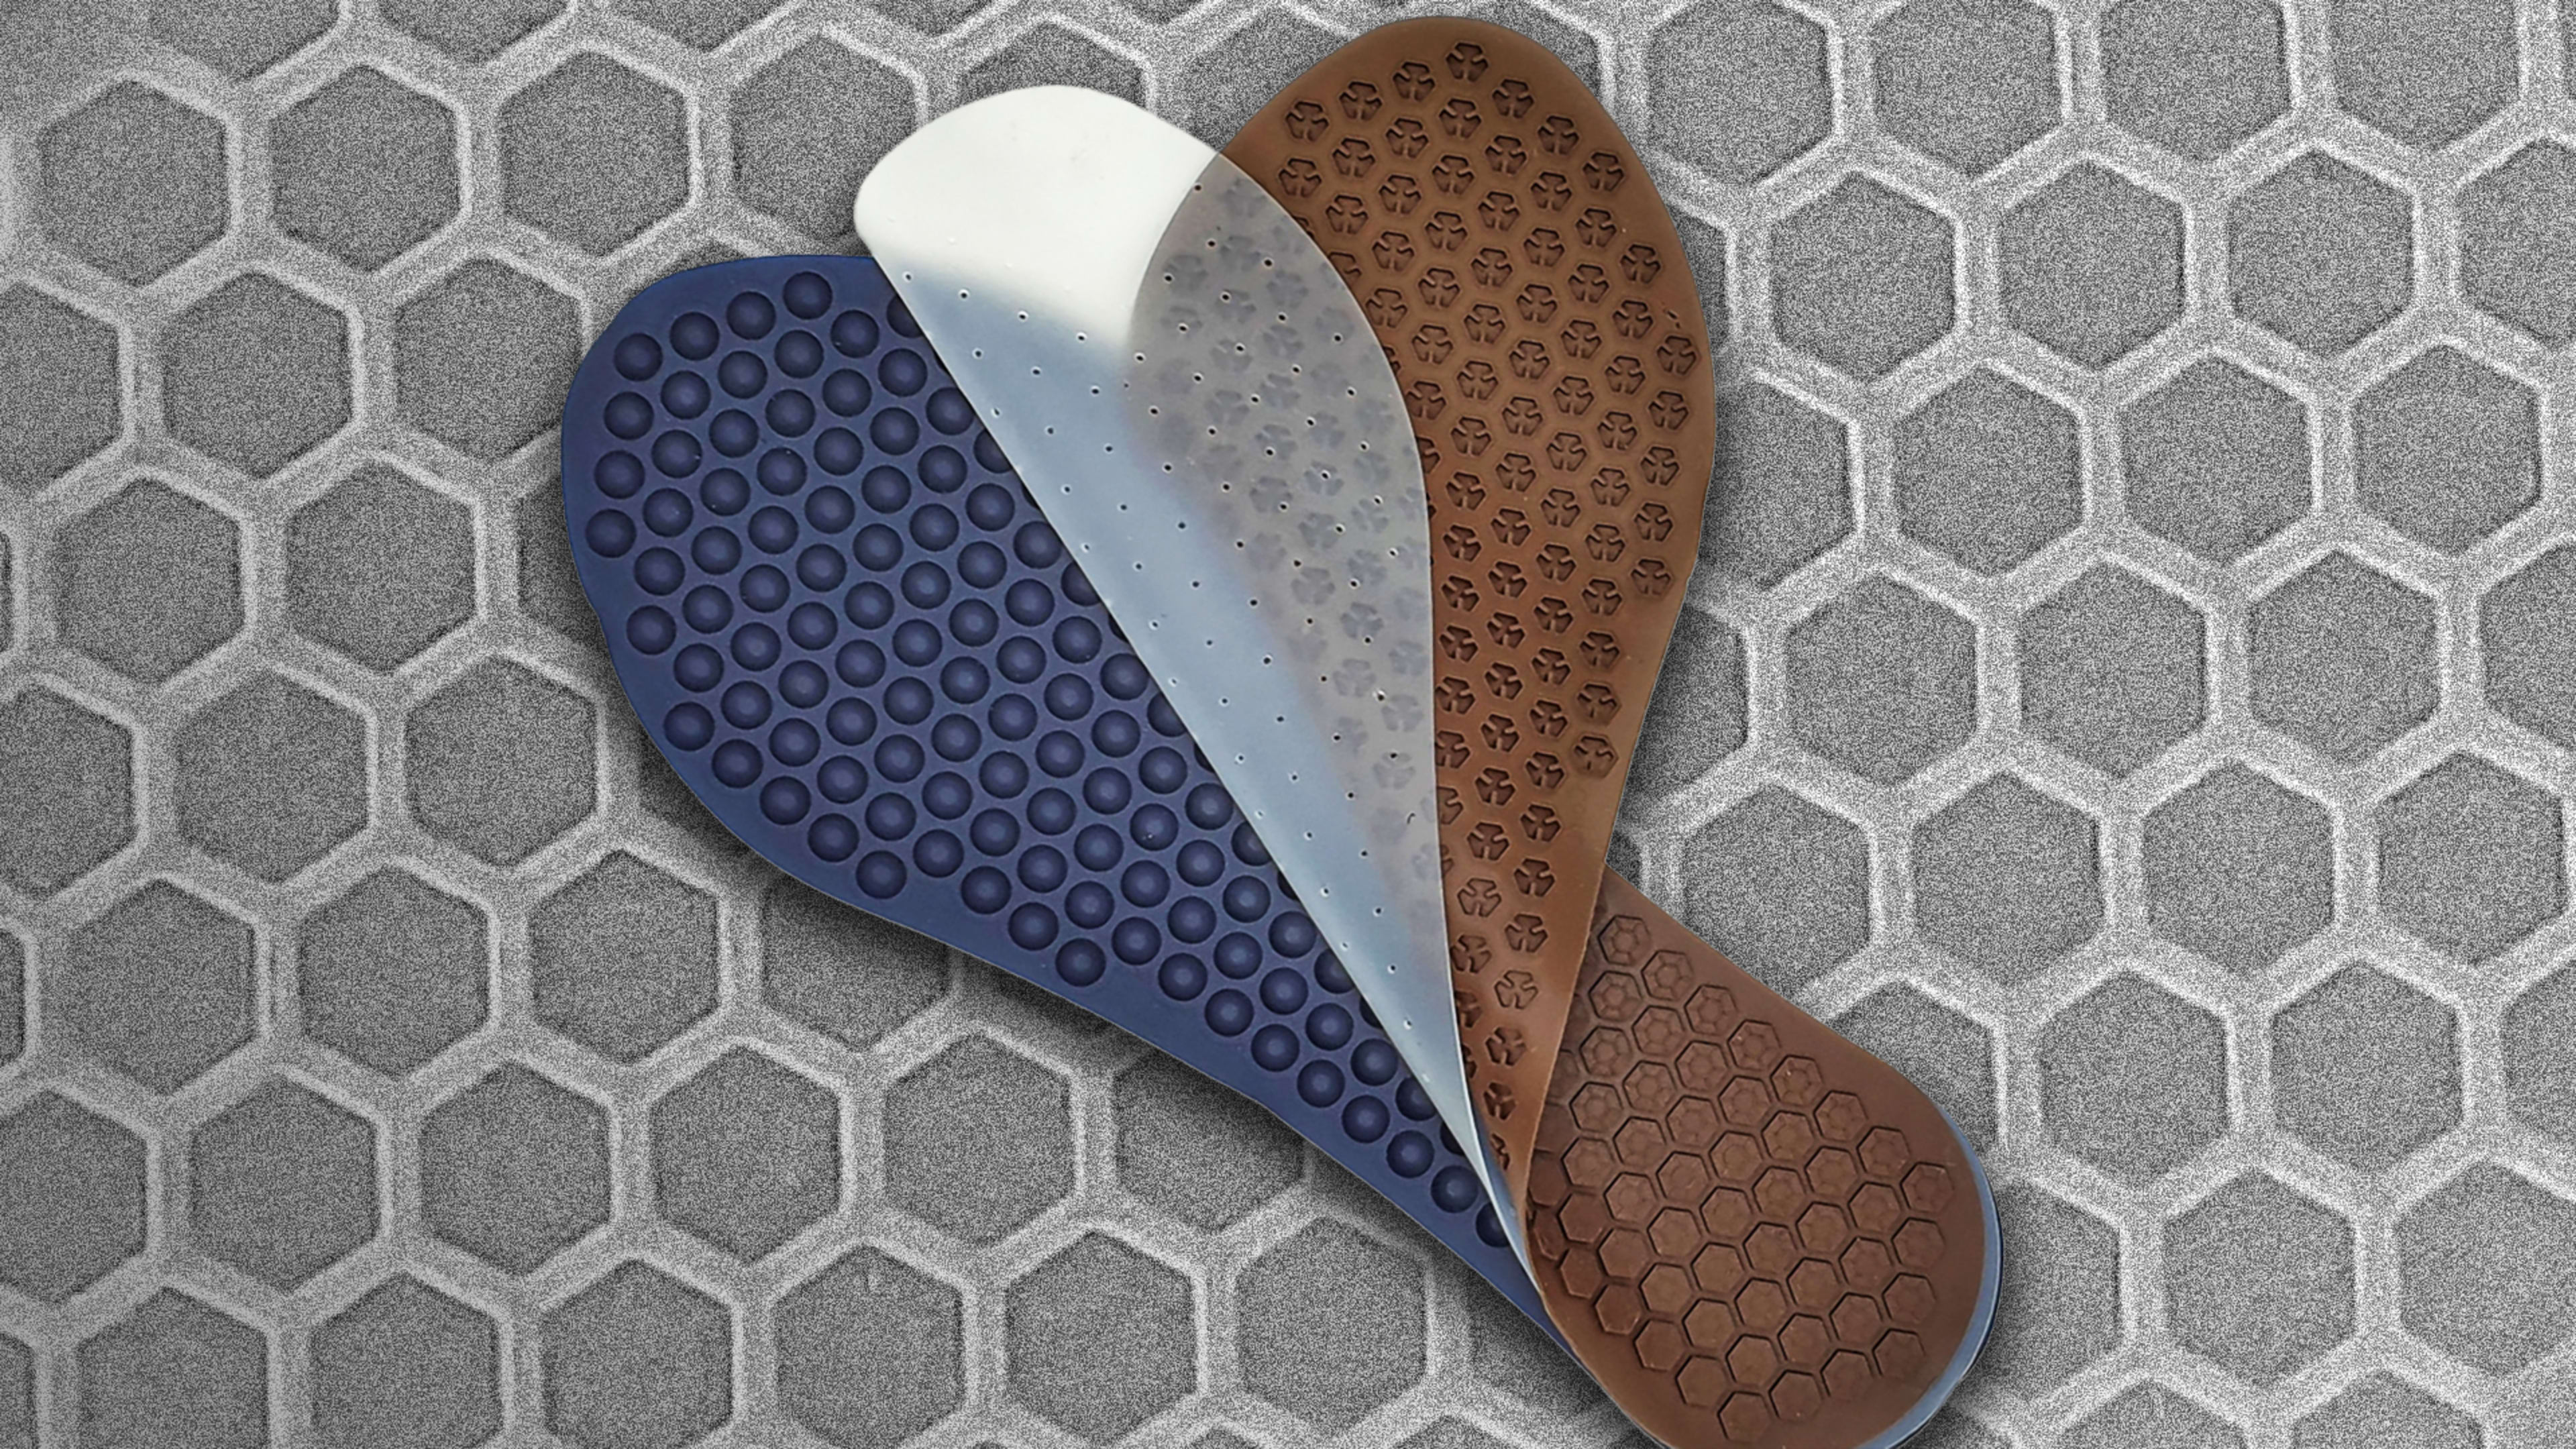 These high-tech insoles promise to cool your sweaty feet while you walk on puffs of air